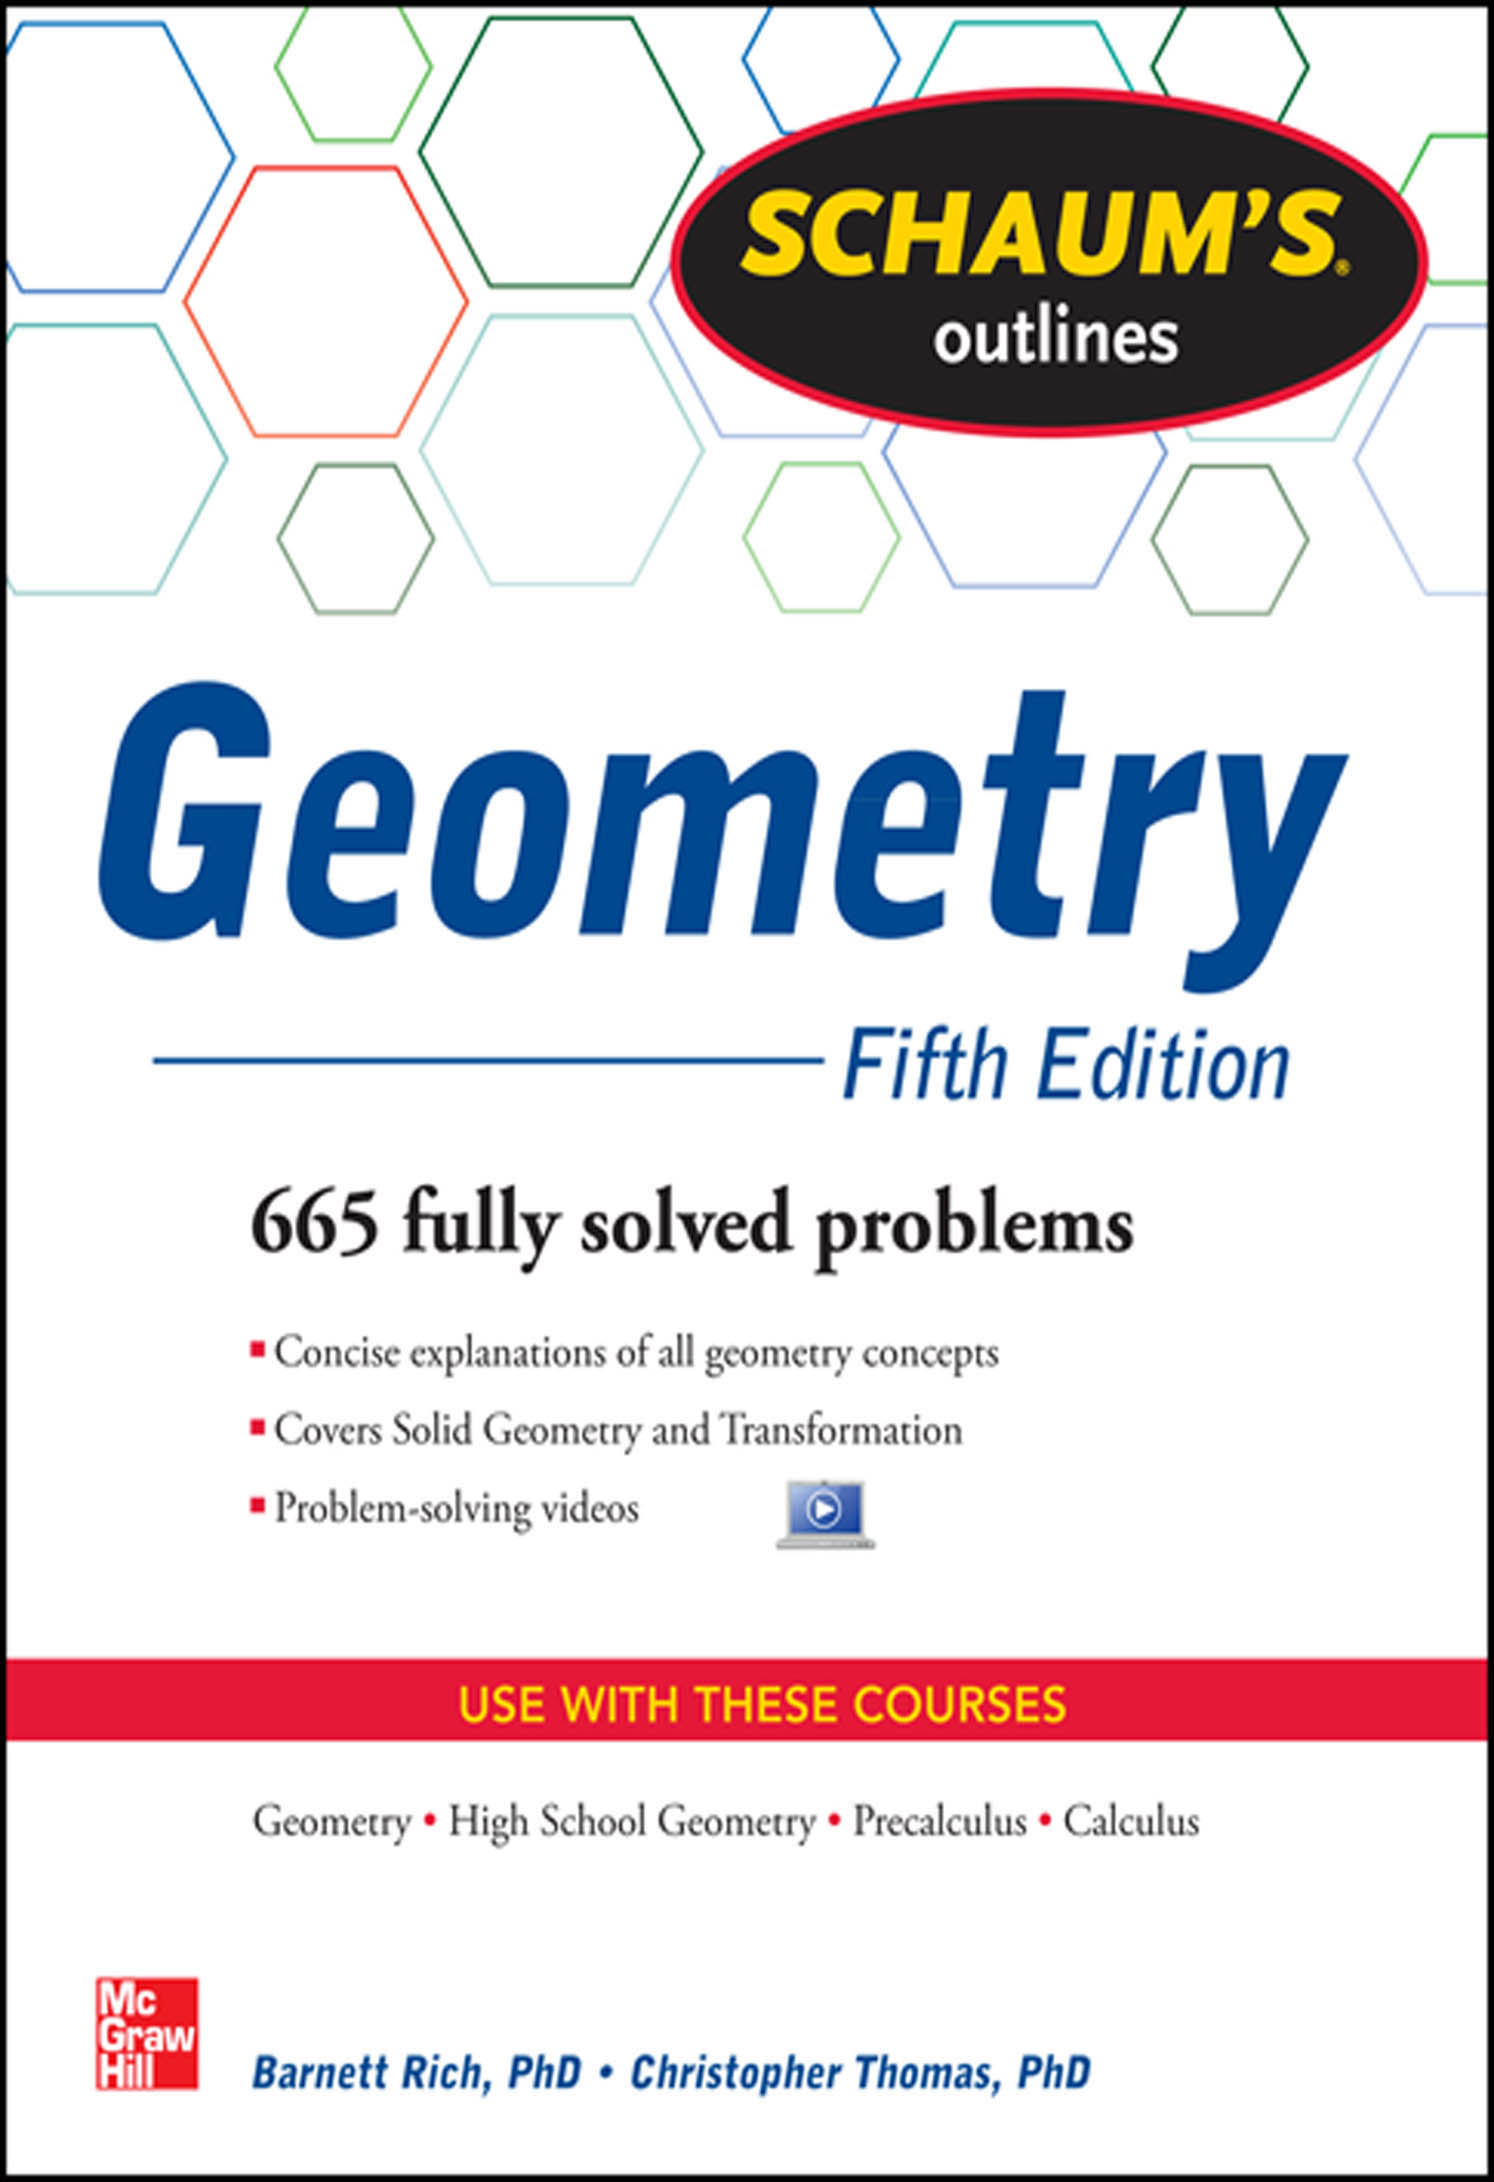 Schaum's Outline of Geometry, 5th Edition